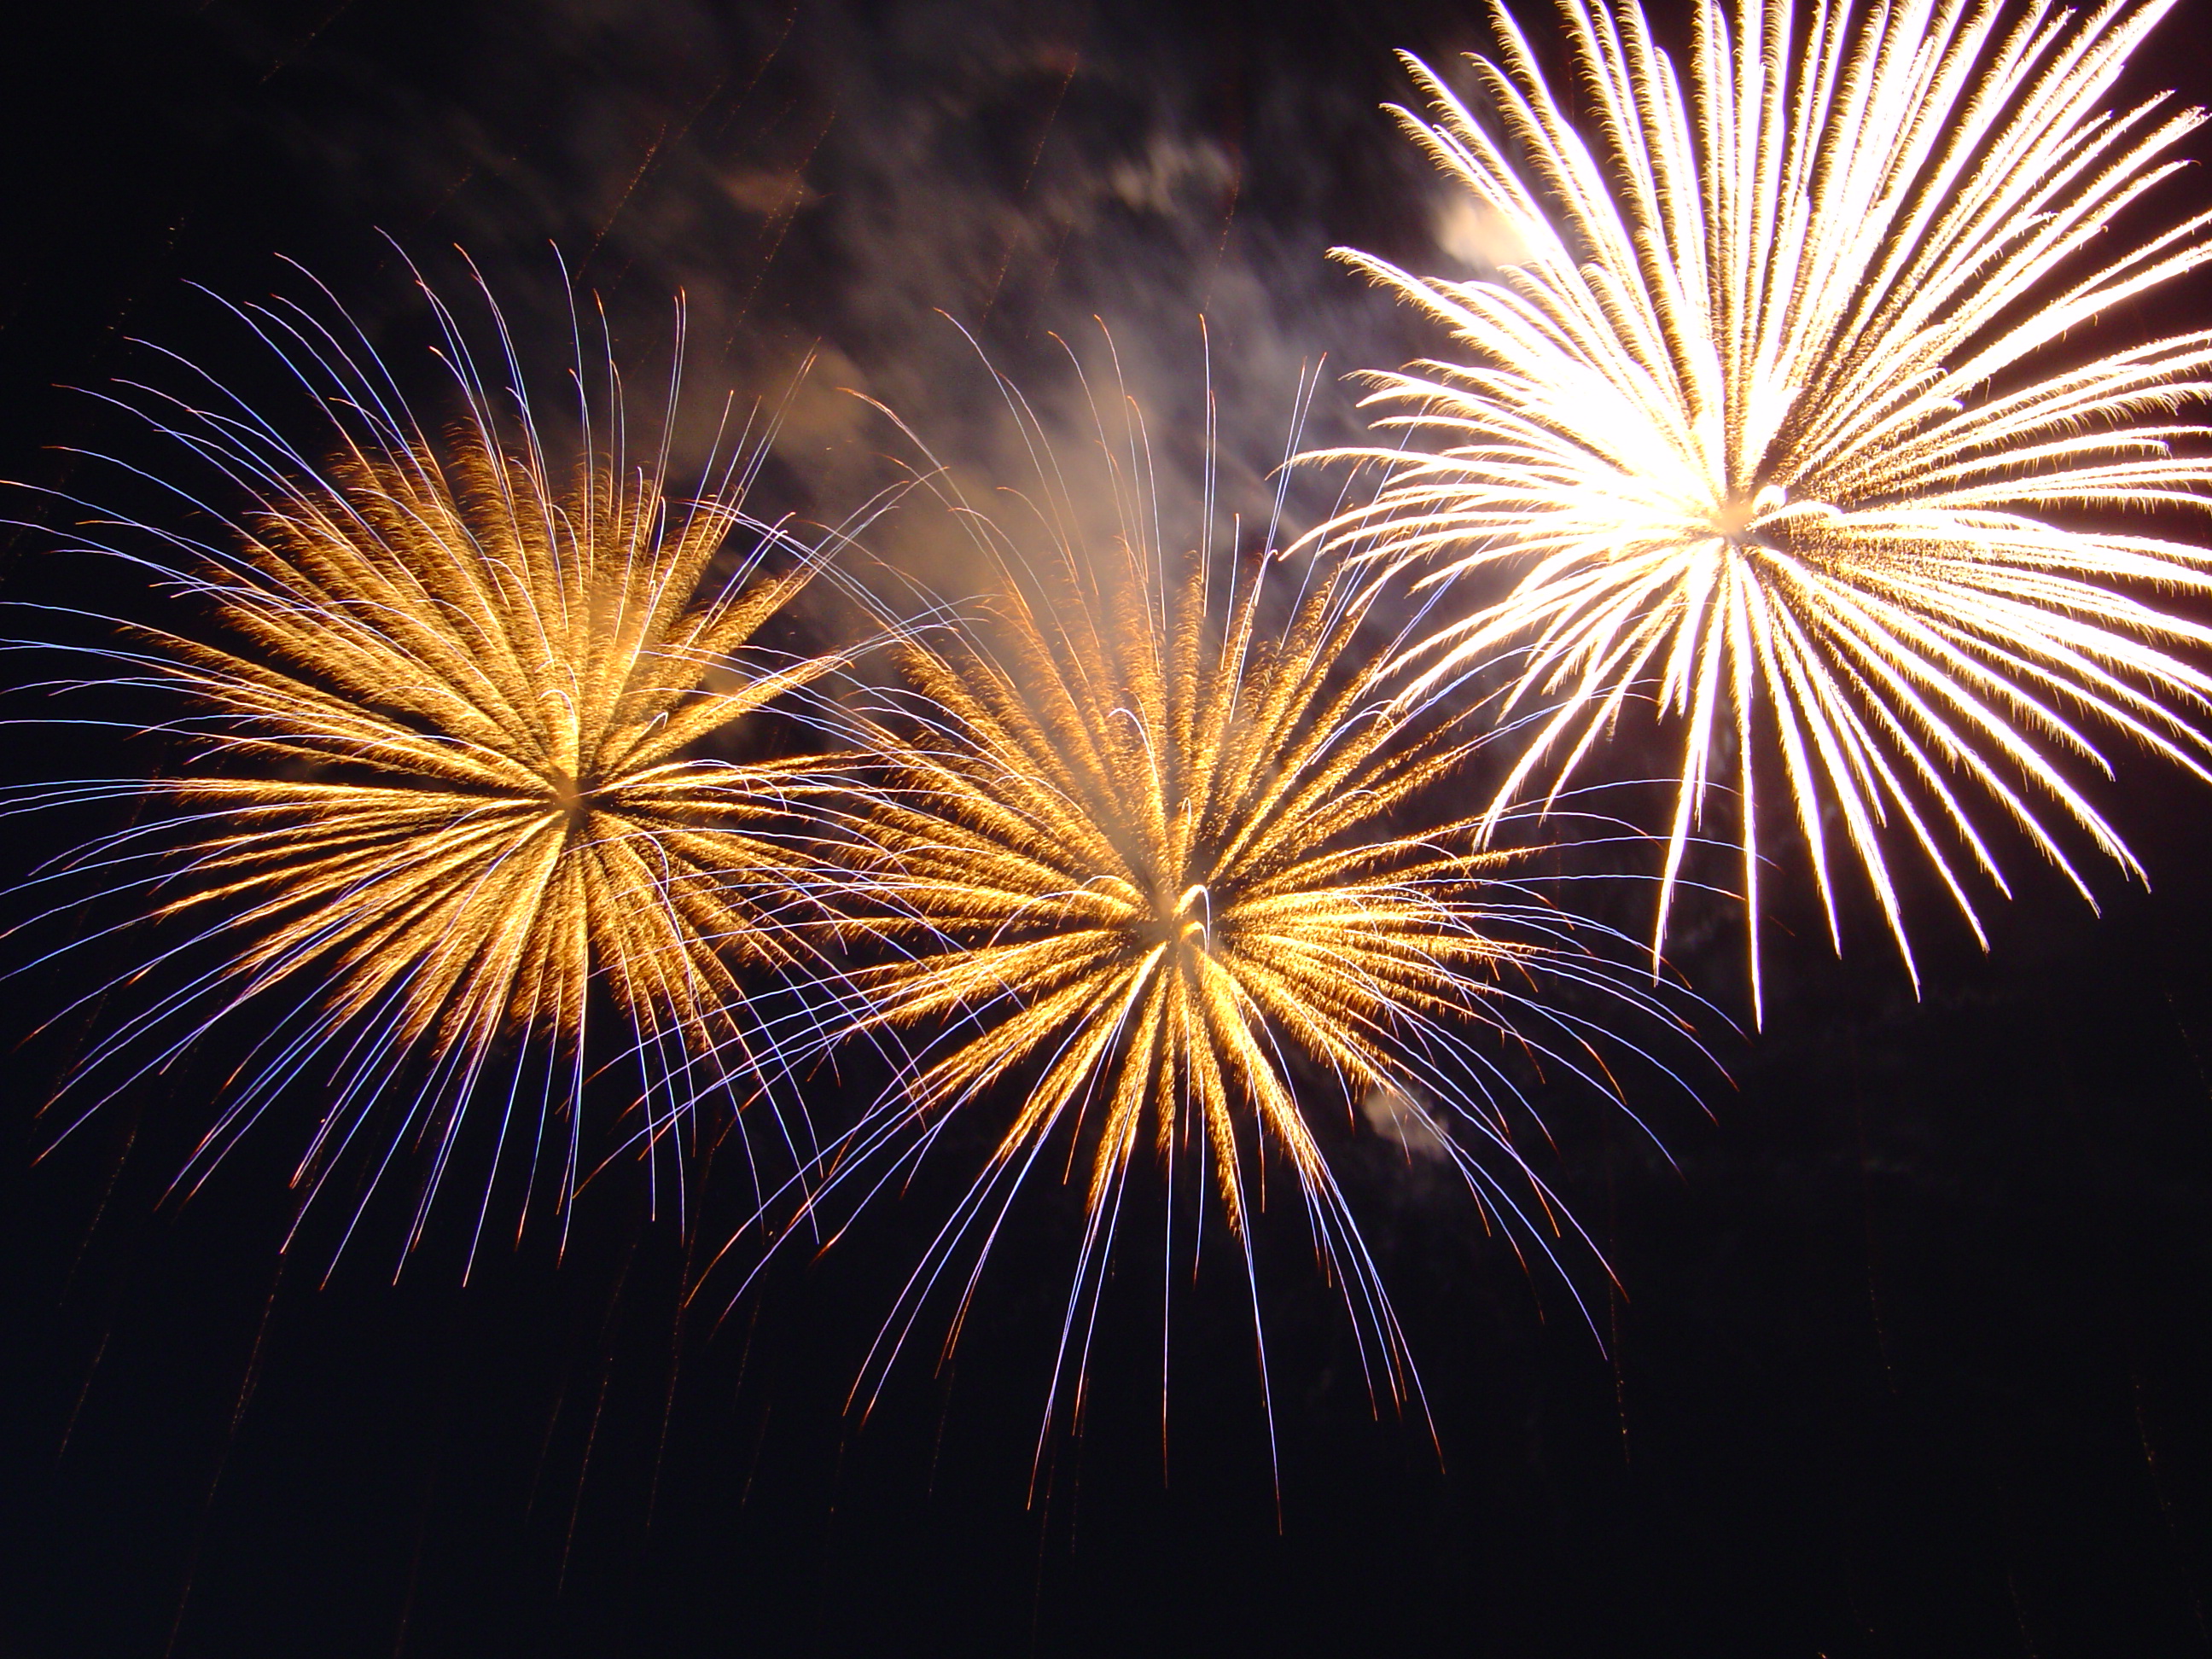 An image of three firework blasts over the night sky for New Year's. Photo courtesy of Creative Commons